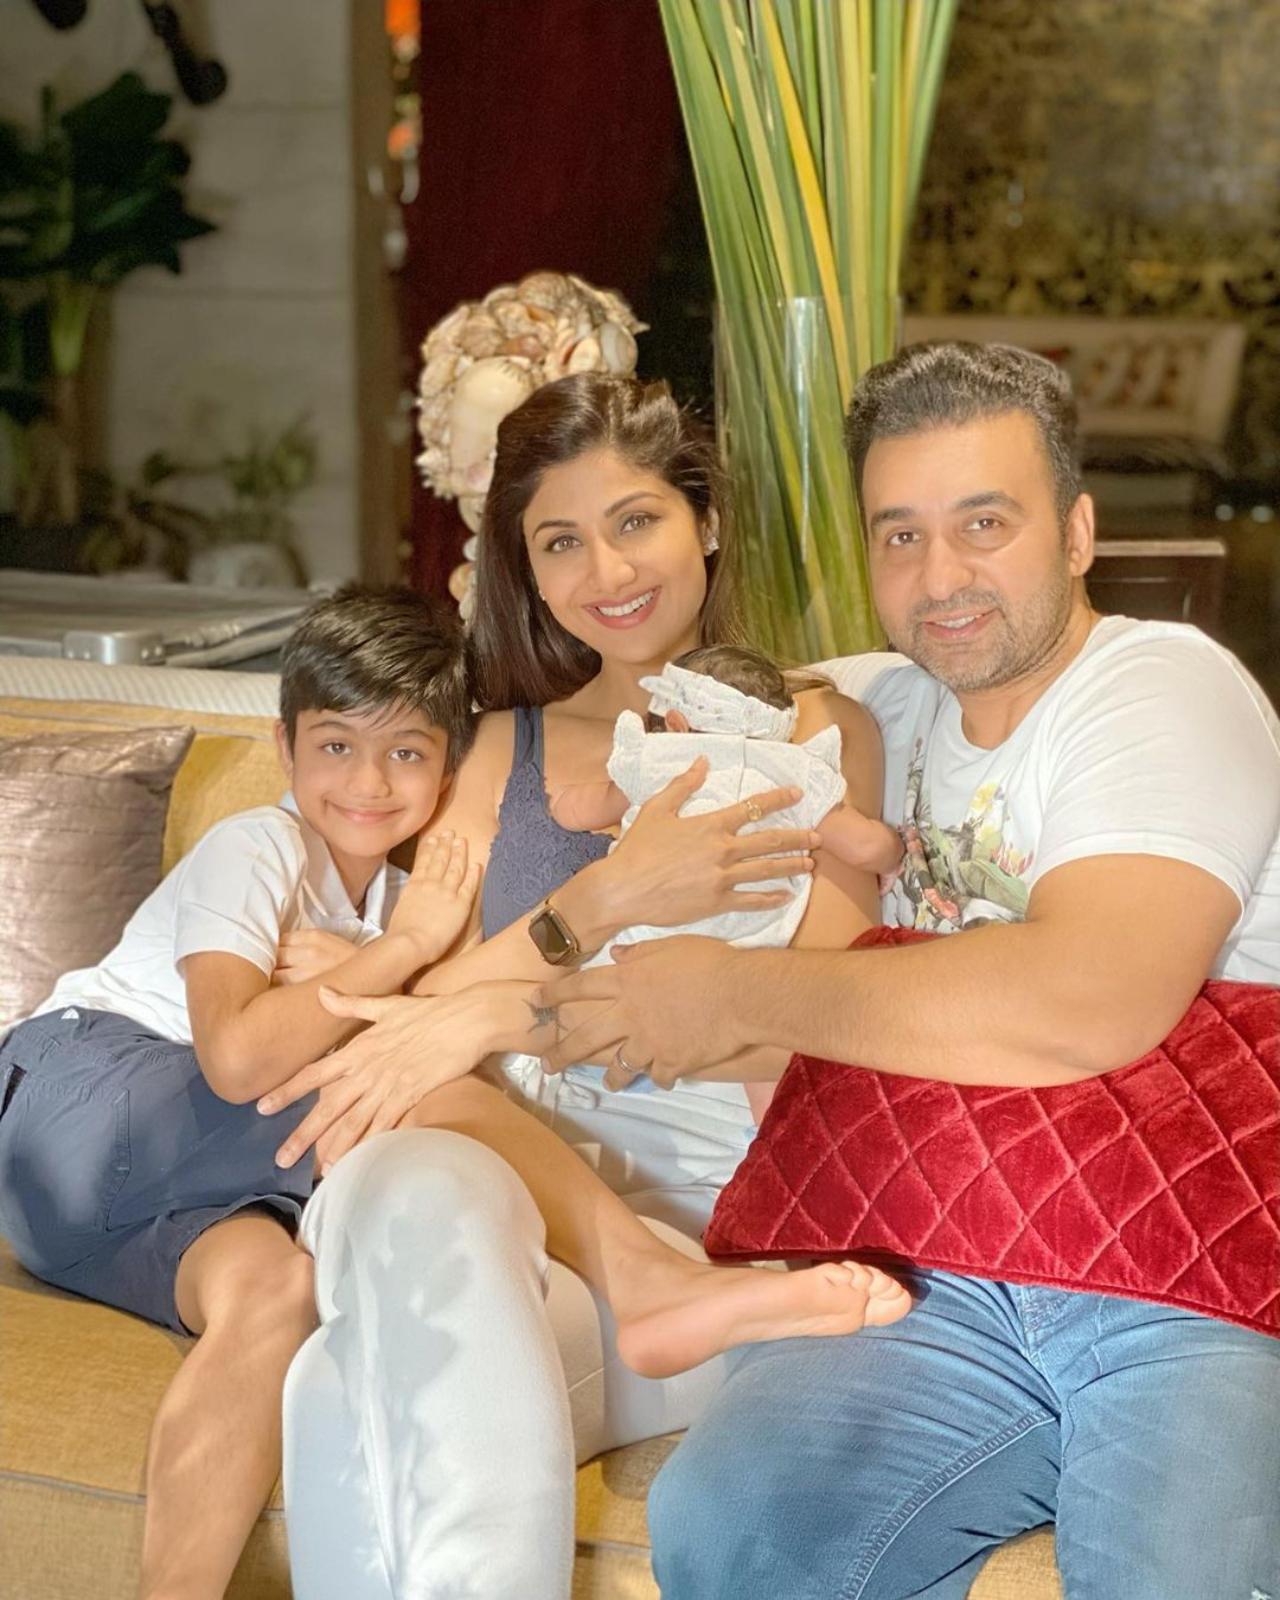 However, the family faced a tough time when Raj Kundra was arrested in a pornography-related case in 2021. He was let go on bail after spending nearly 3 months in jail. The case is currently in court.